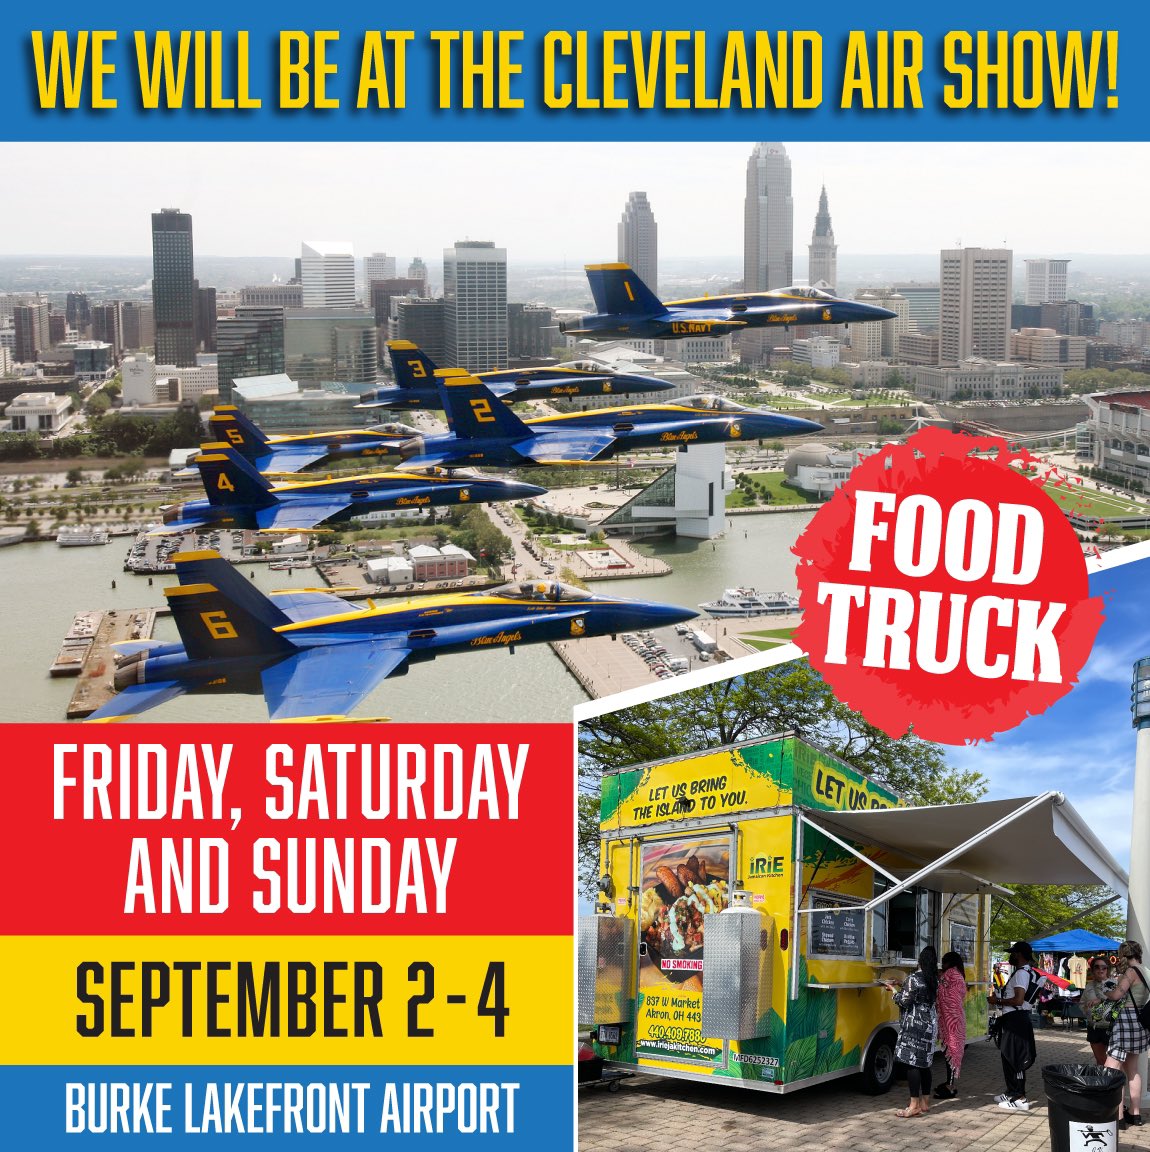 Saturday, Sunday & Monday in Cleveland! Check out our NEW Food Truck. 💯🇯🇲🚗
#iriejamaicankitchen #cleairshow #clevelandairshow #cleairshow2023 #clevelandairshow2023 #jamaicanfoodtruck #iriefoodtruck #iriefoodtrailer #mobilejamaicanfood #irietruck #jamaicanfoodtrailer #chefomar